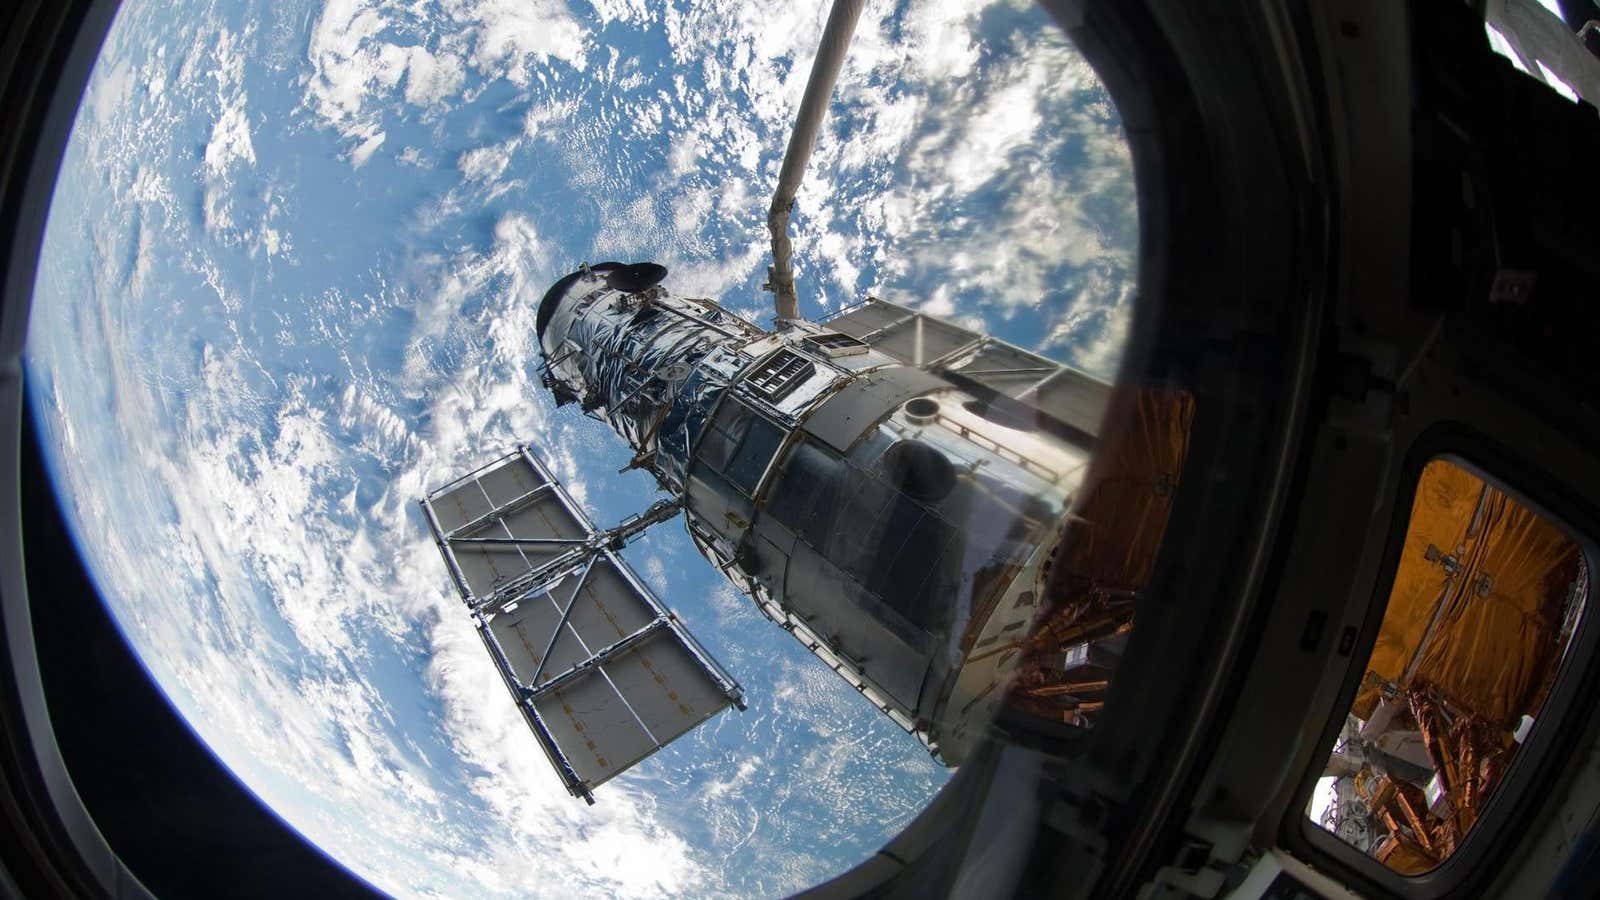 A view of the Hubble Space Telescope from onboard Space Shuttle Atlantis during a 2009 maintenance mission.